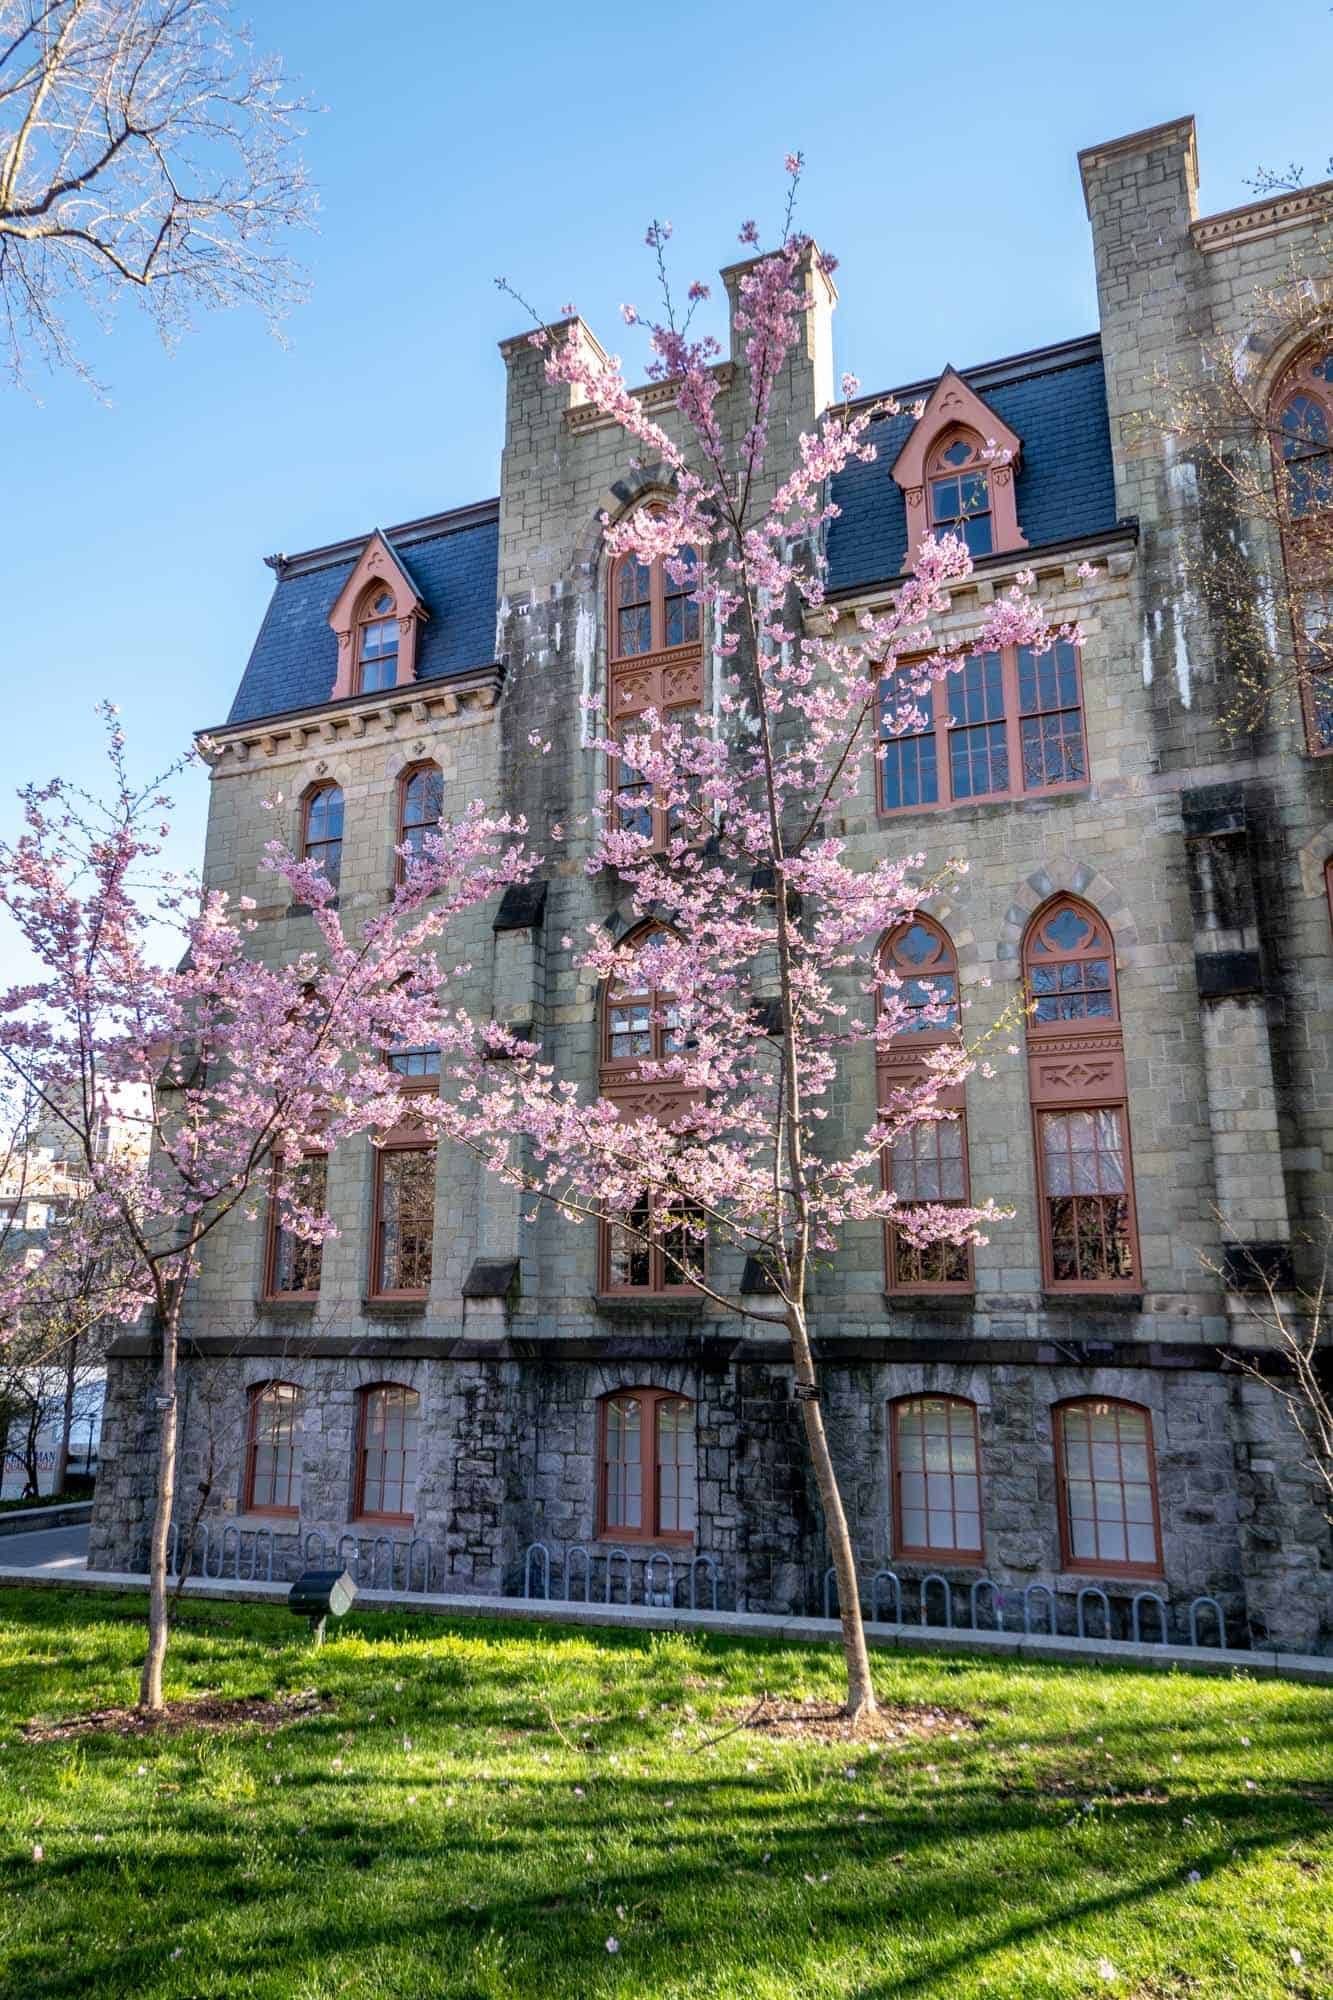 two trees with pink blossoms in front of a large building with red window frames